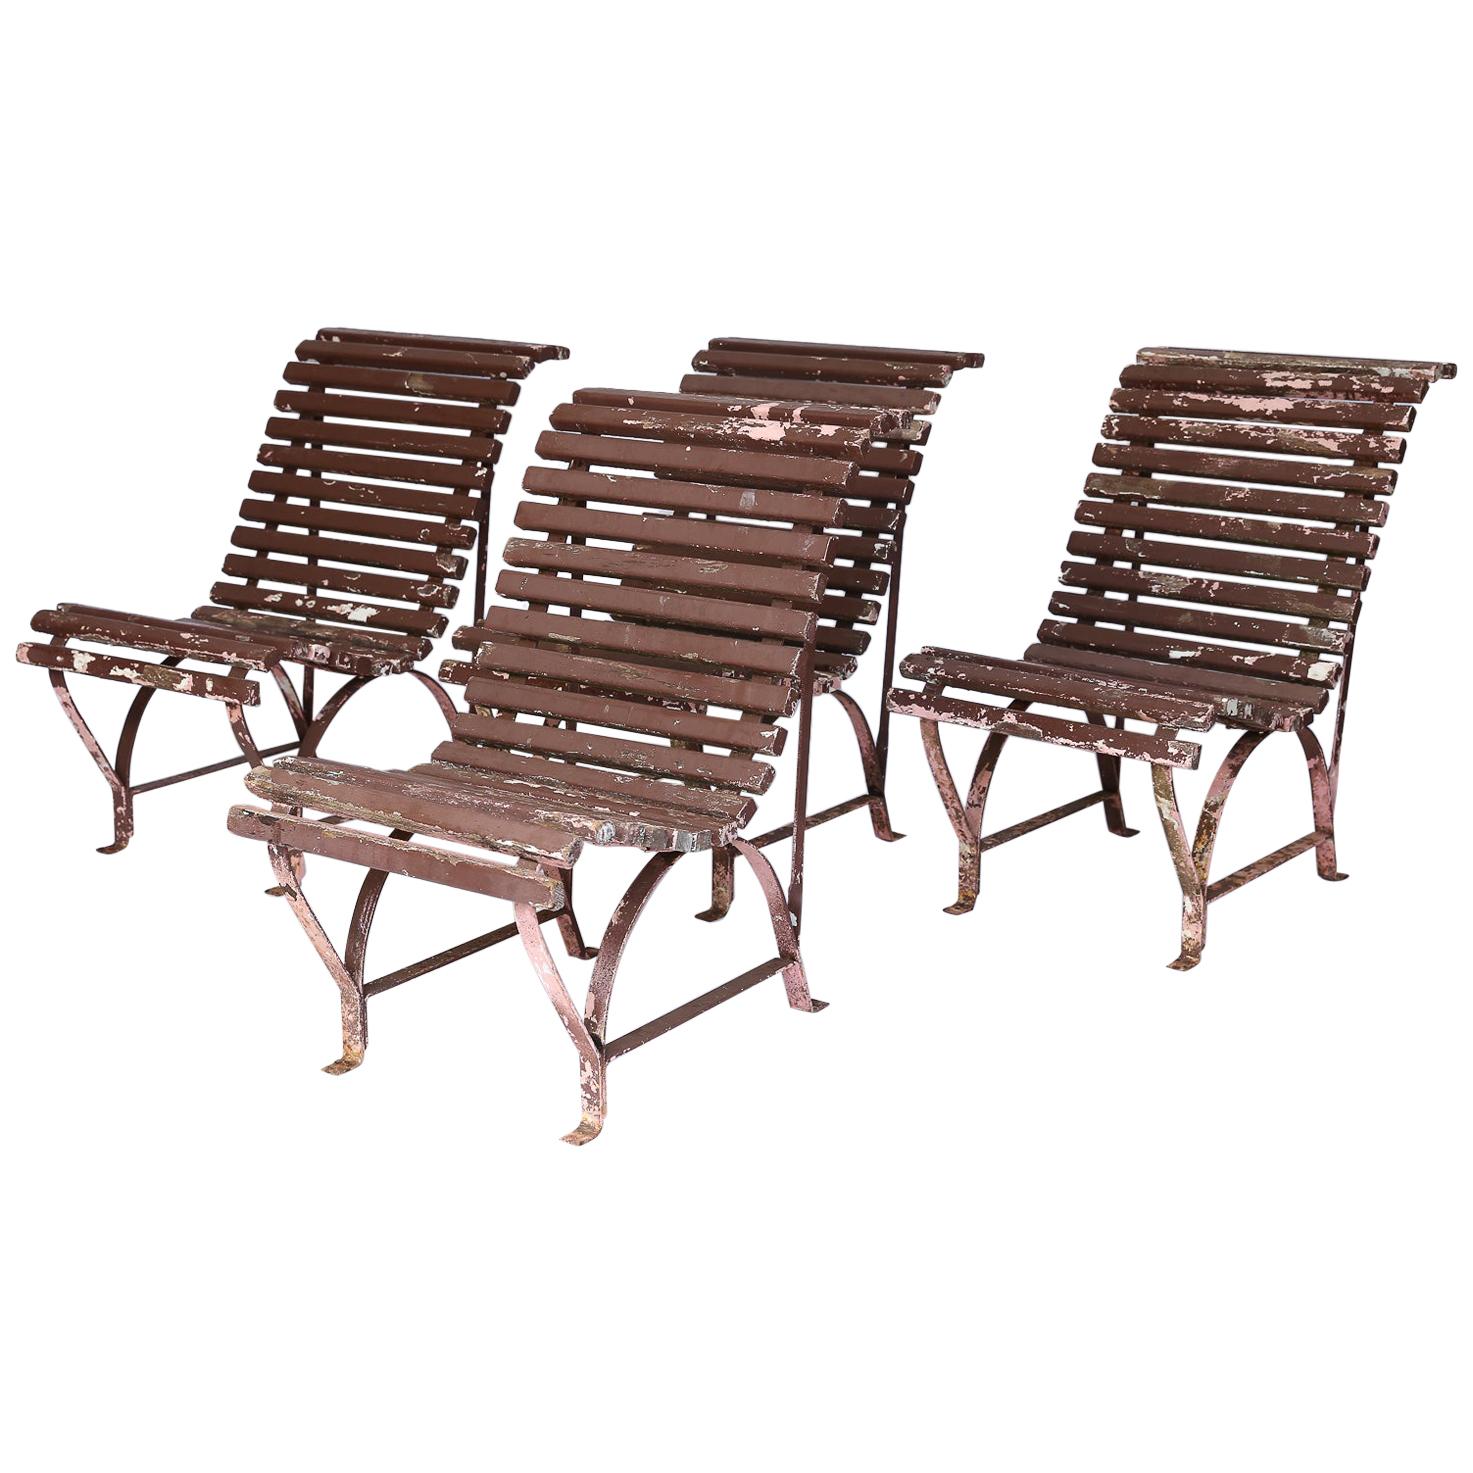 Set of Four French Garden Chairs, circa 1940